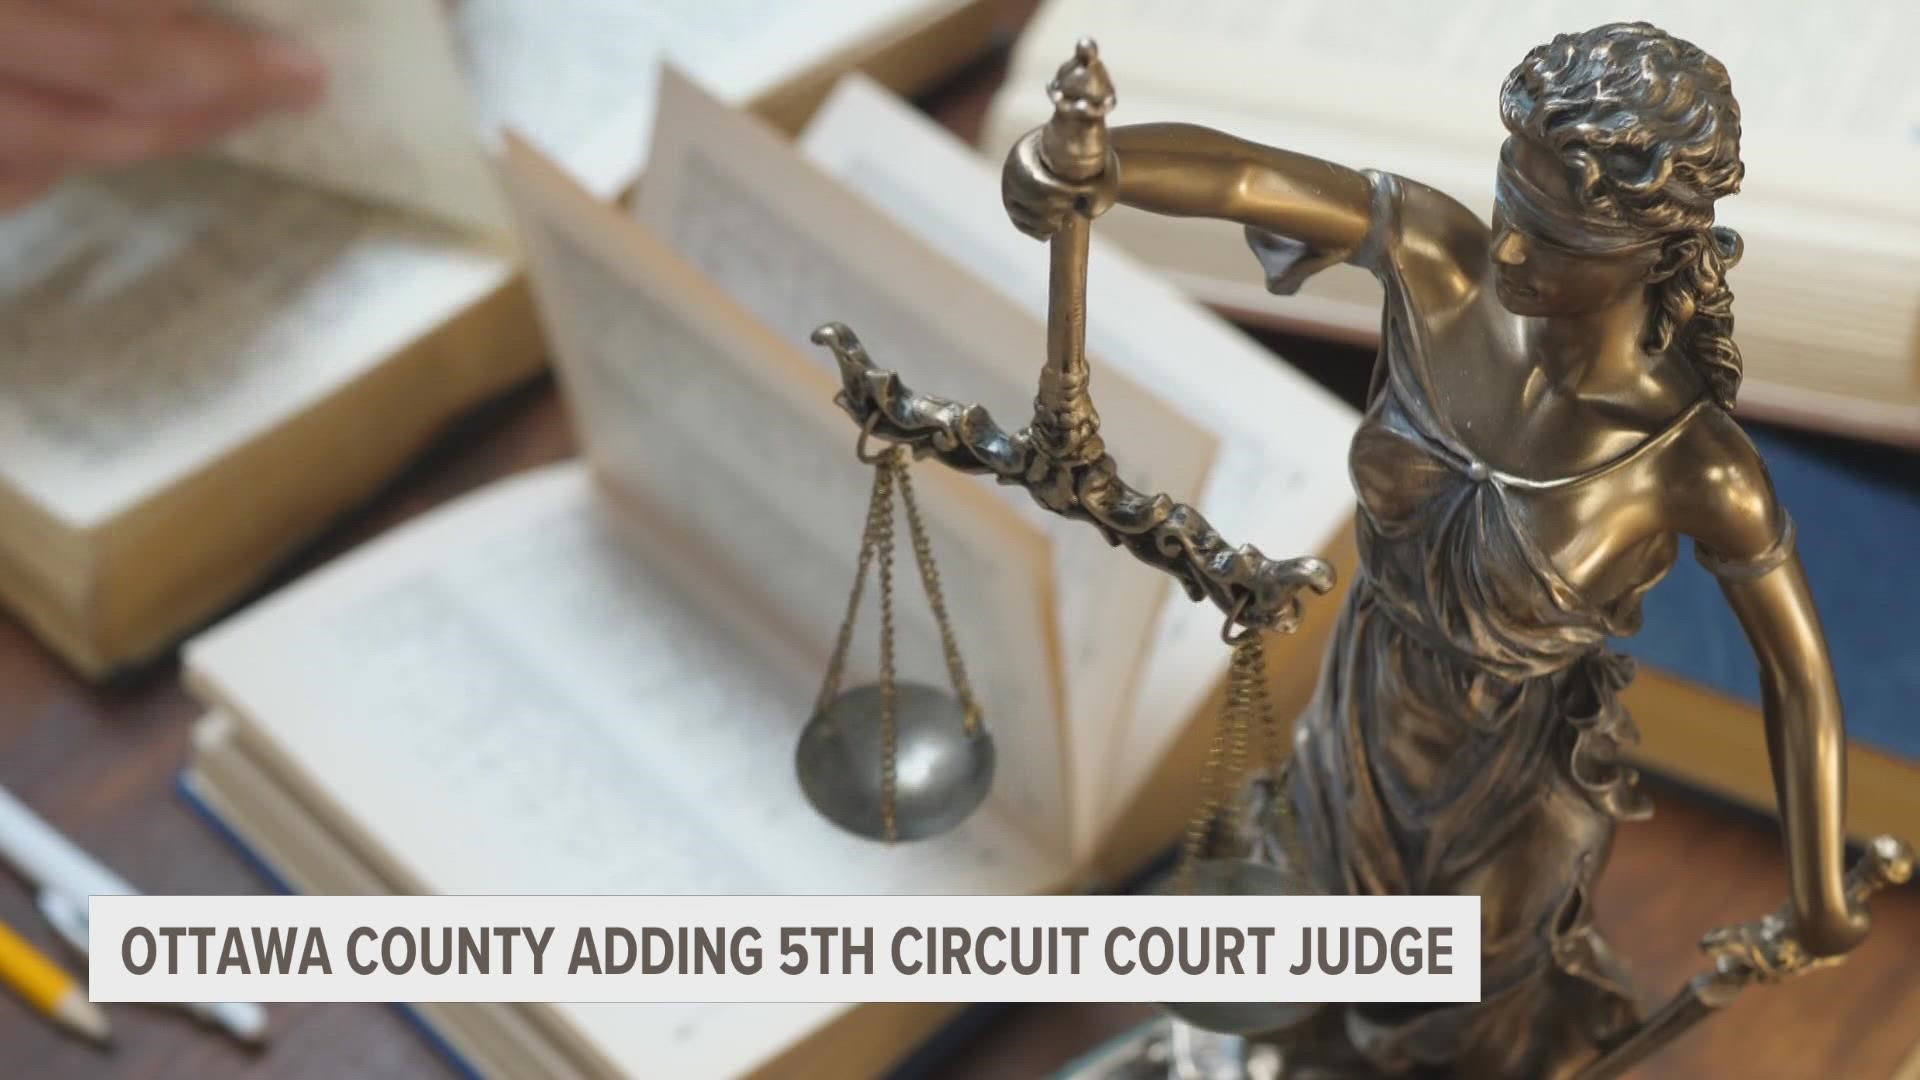 Ottawa County continues to be the fastest growing county in Michigan, which is why a new judge, who will be handling family court, is being added to the system.